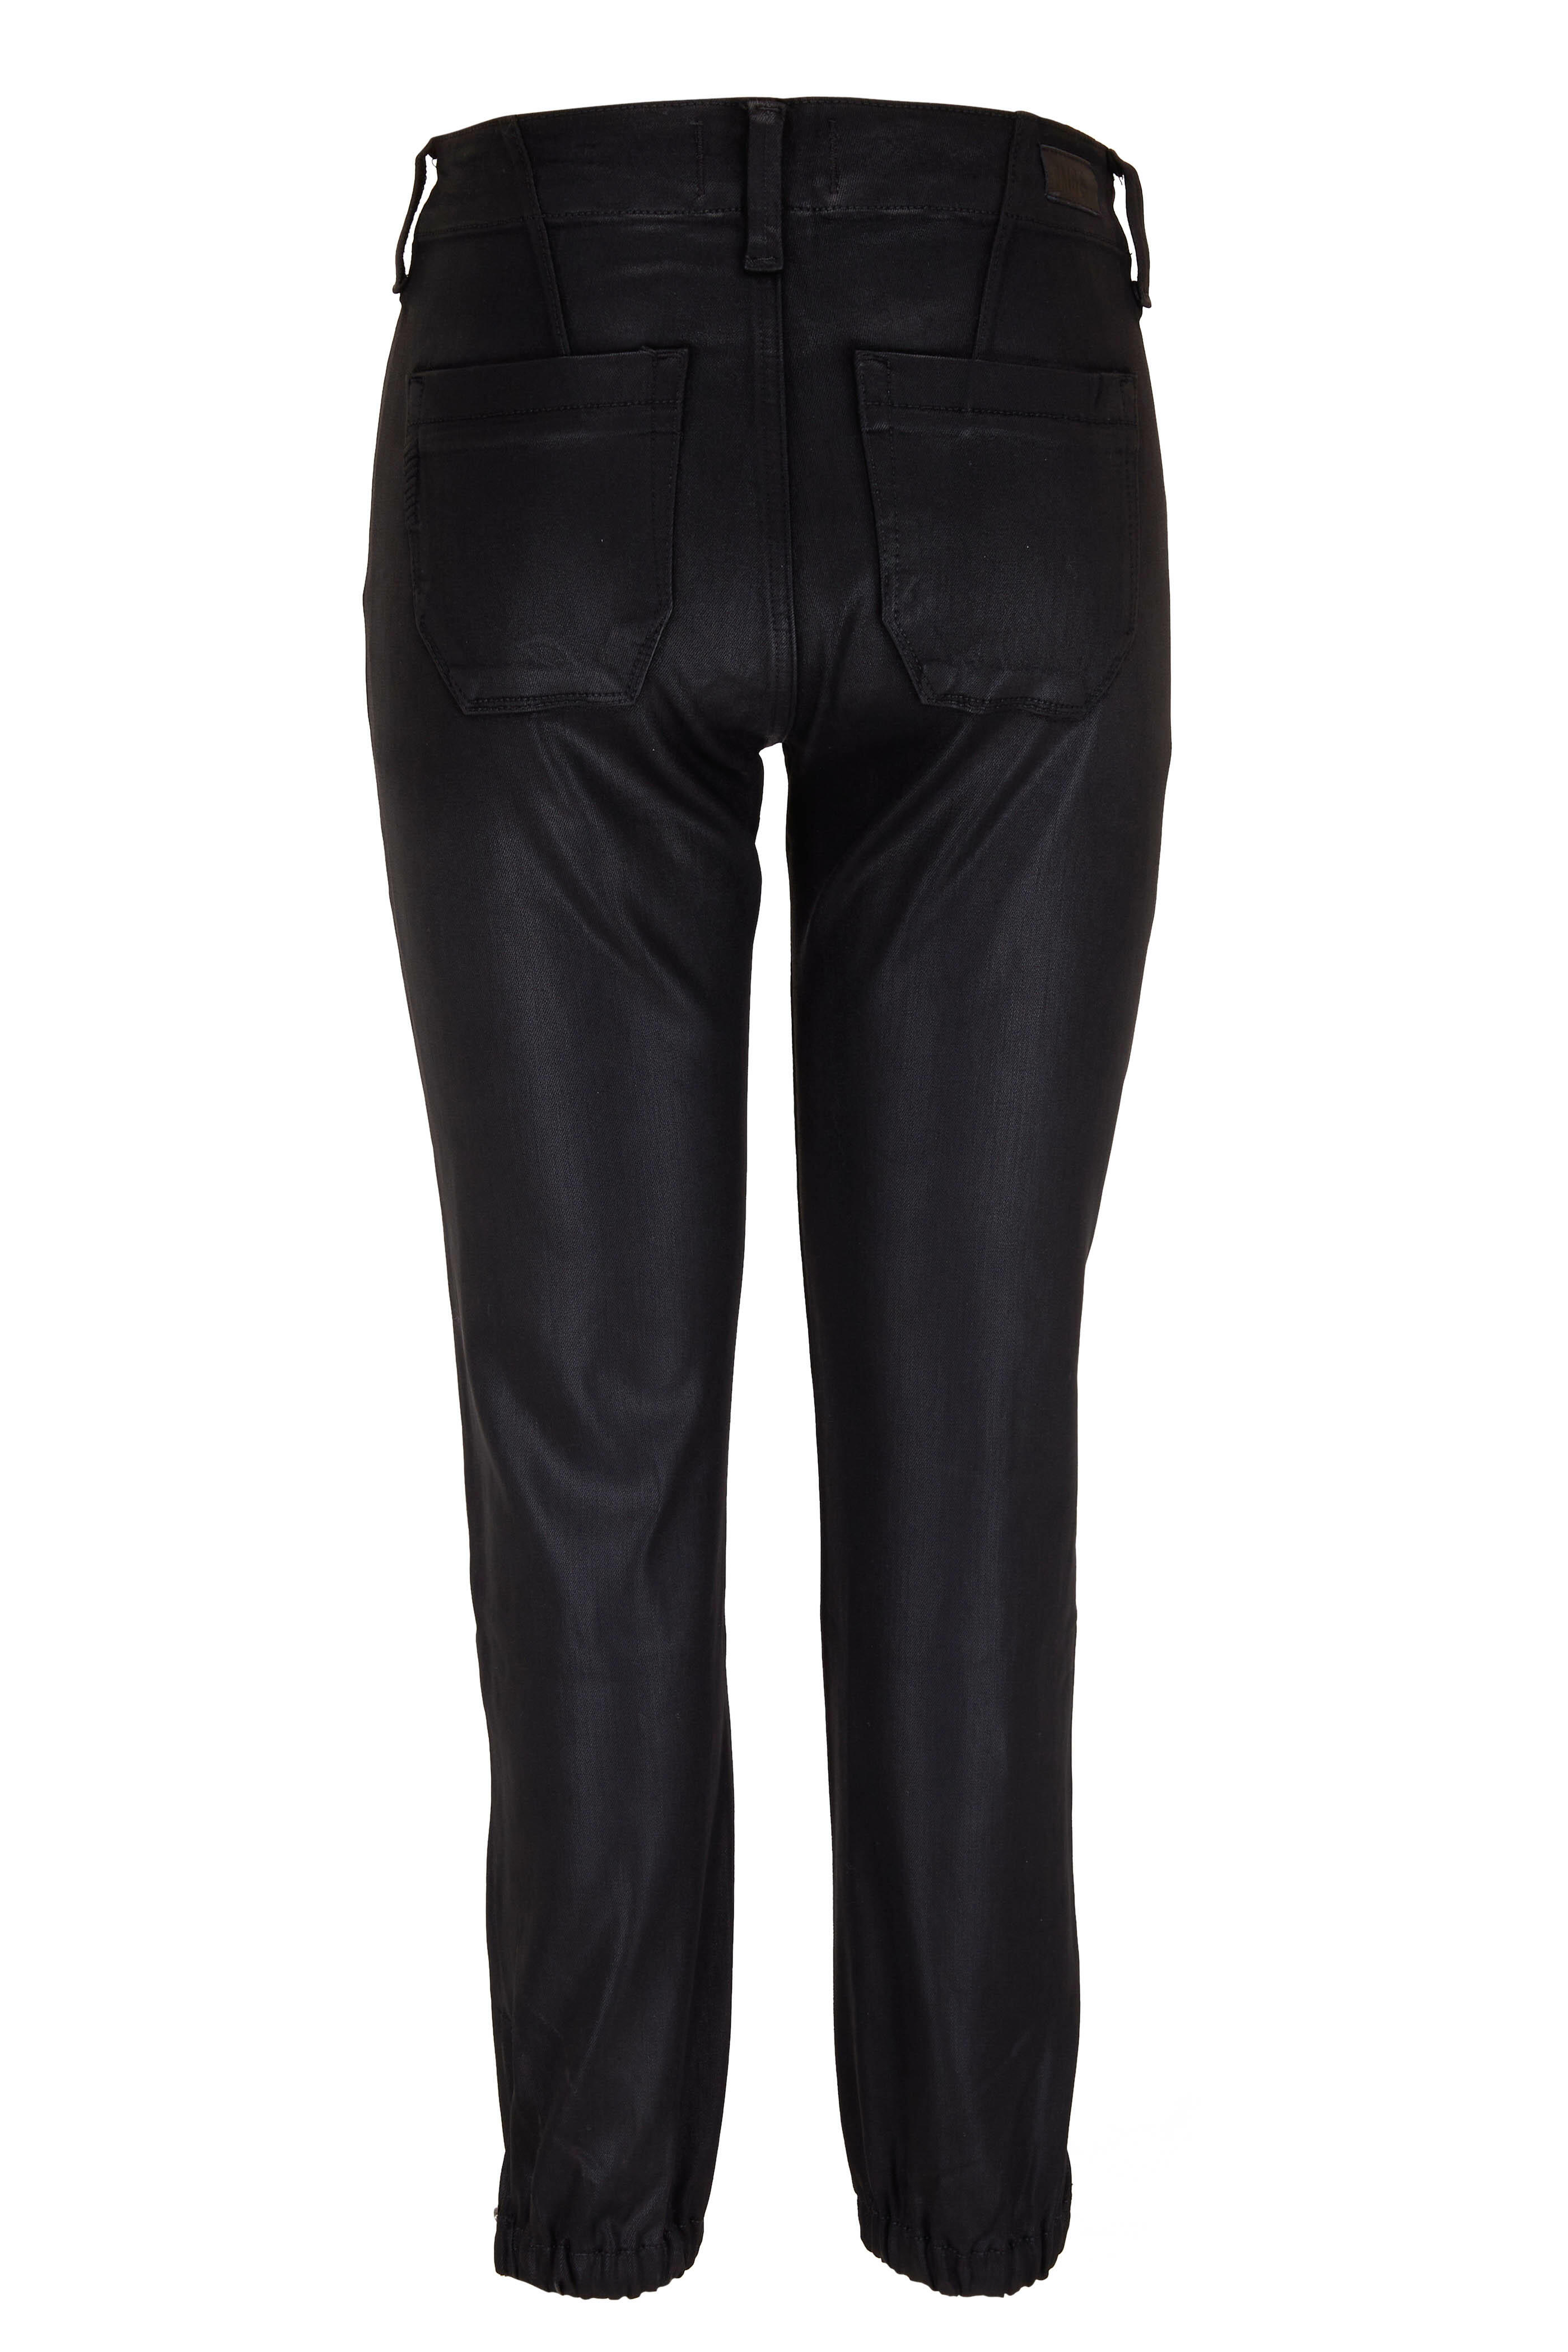 Paige - Mayslie Black Fog Luxe Coating Cropped Jogger